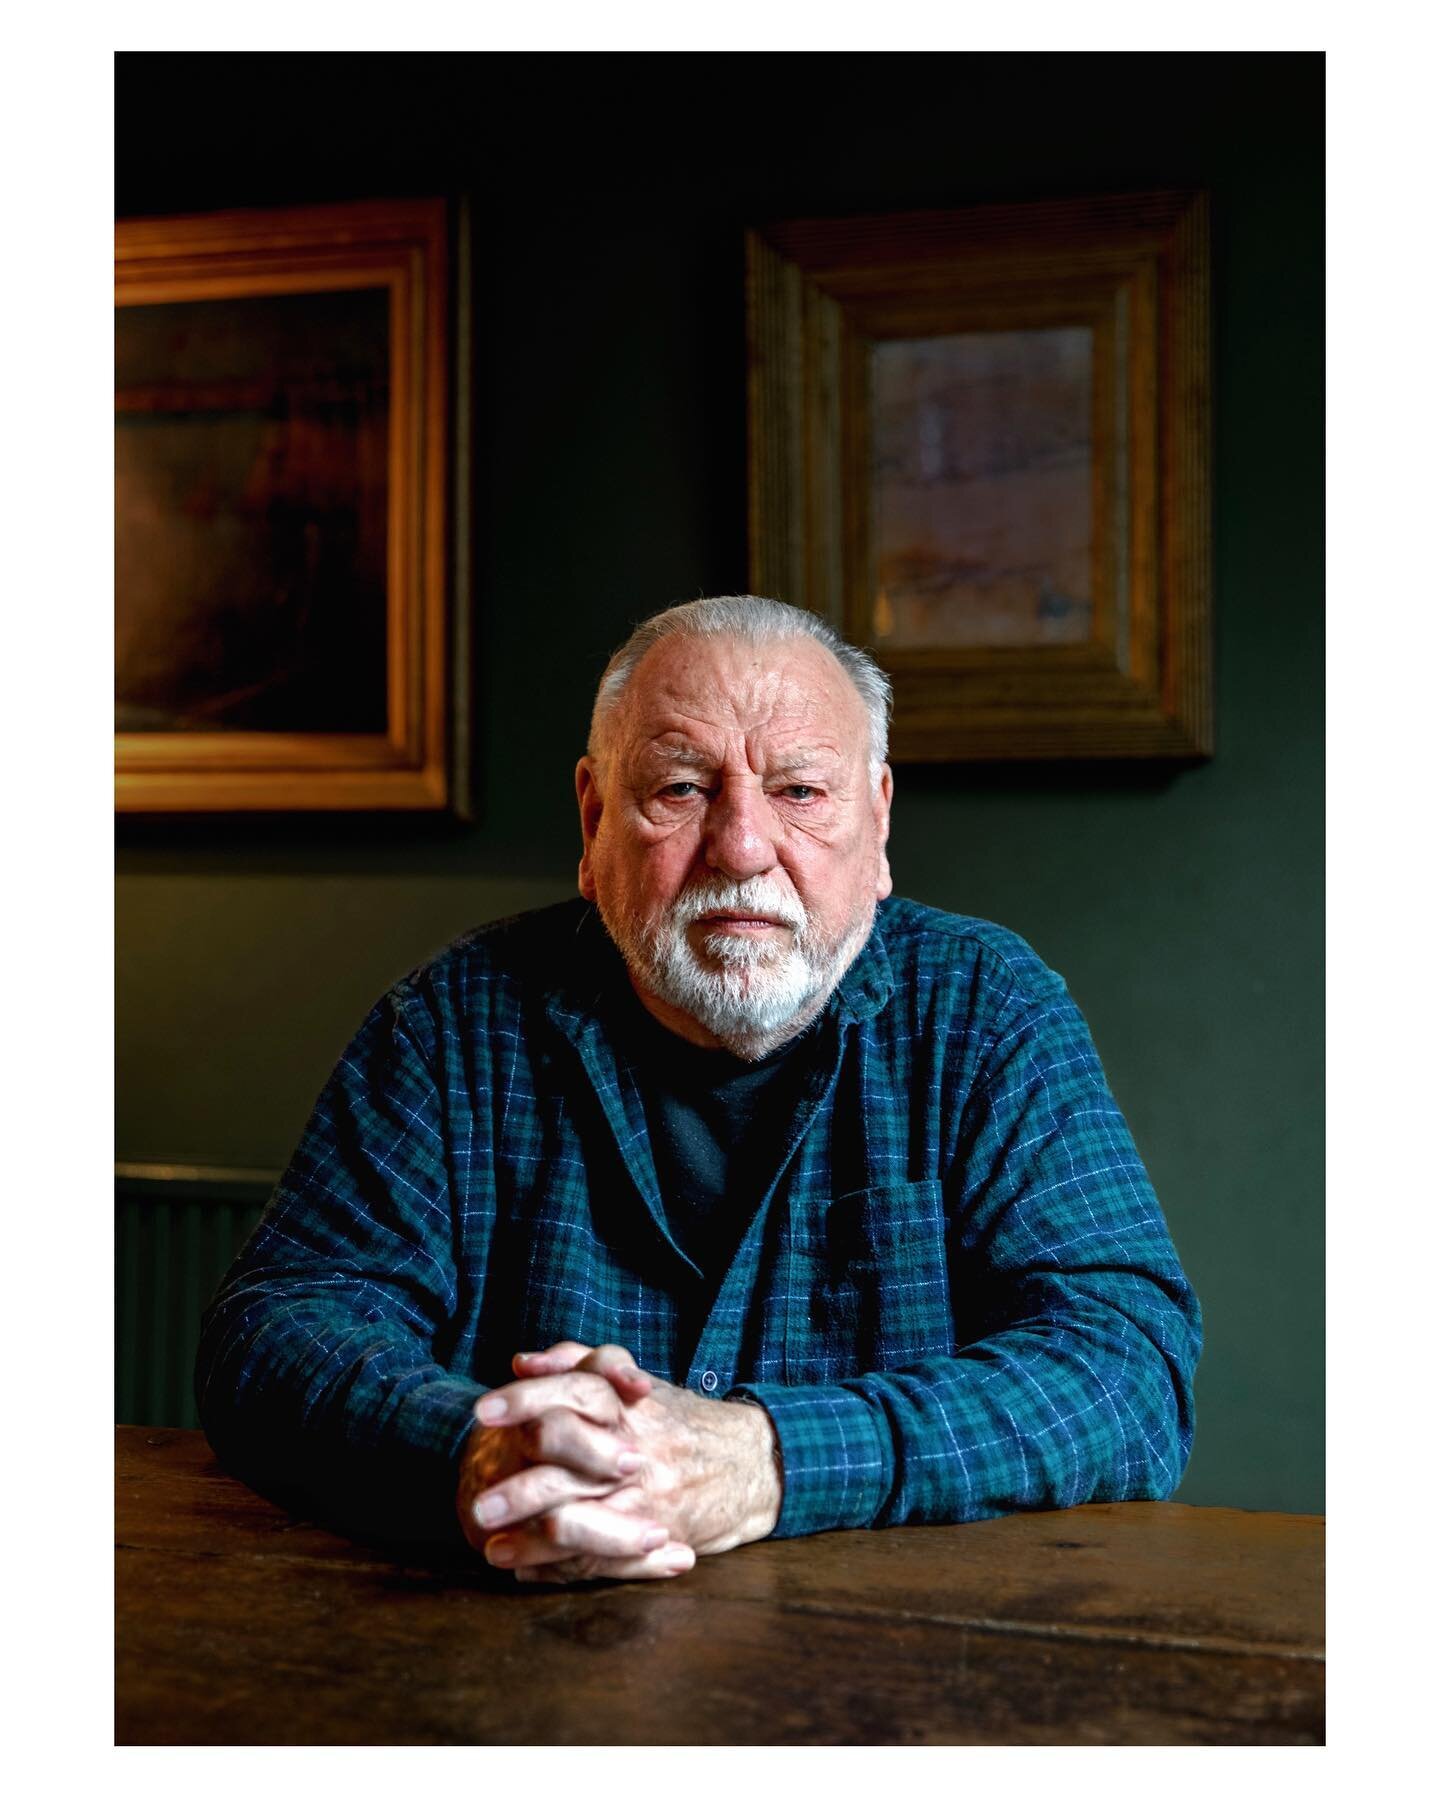 It was an absolute joy to shoot Actor Kenneth Cranham in his beautiful home in Islington as part of an ongoing project with @streathamhilltheatre 

📷 @stephblack_photo 
www.stephblackphoto.co.uk

.
.
.
.

 #portraits_ig #portraitoftheday #postthepeo